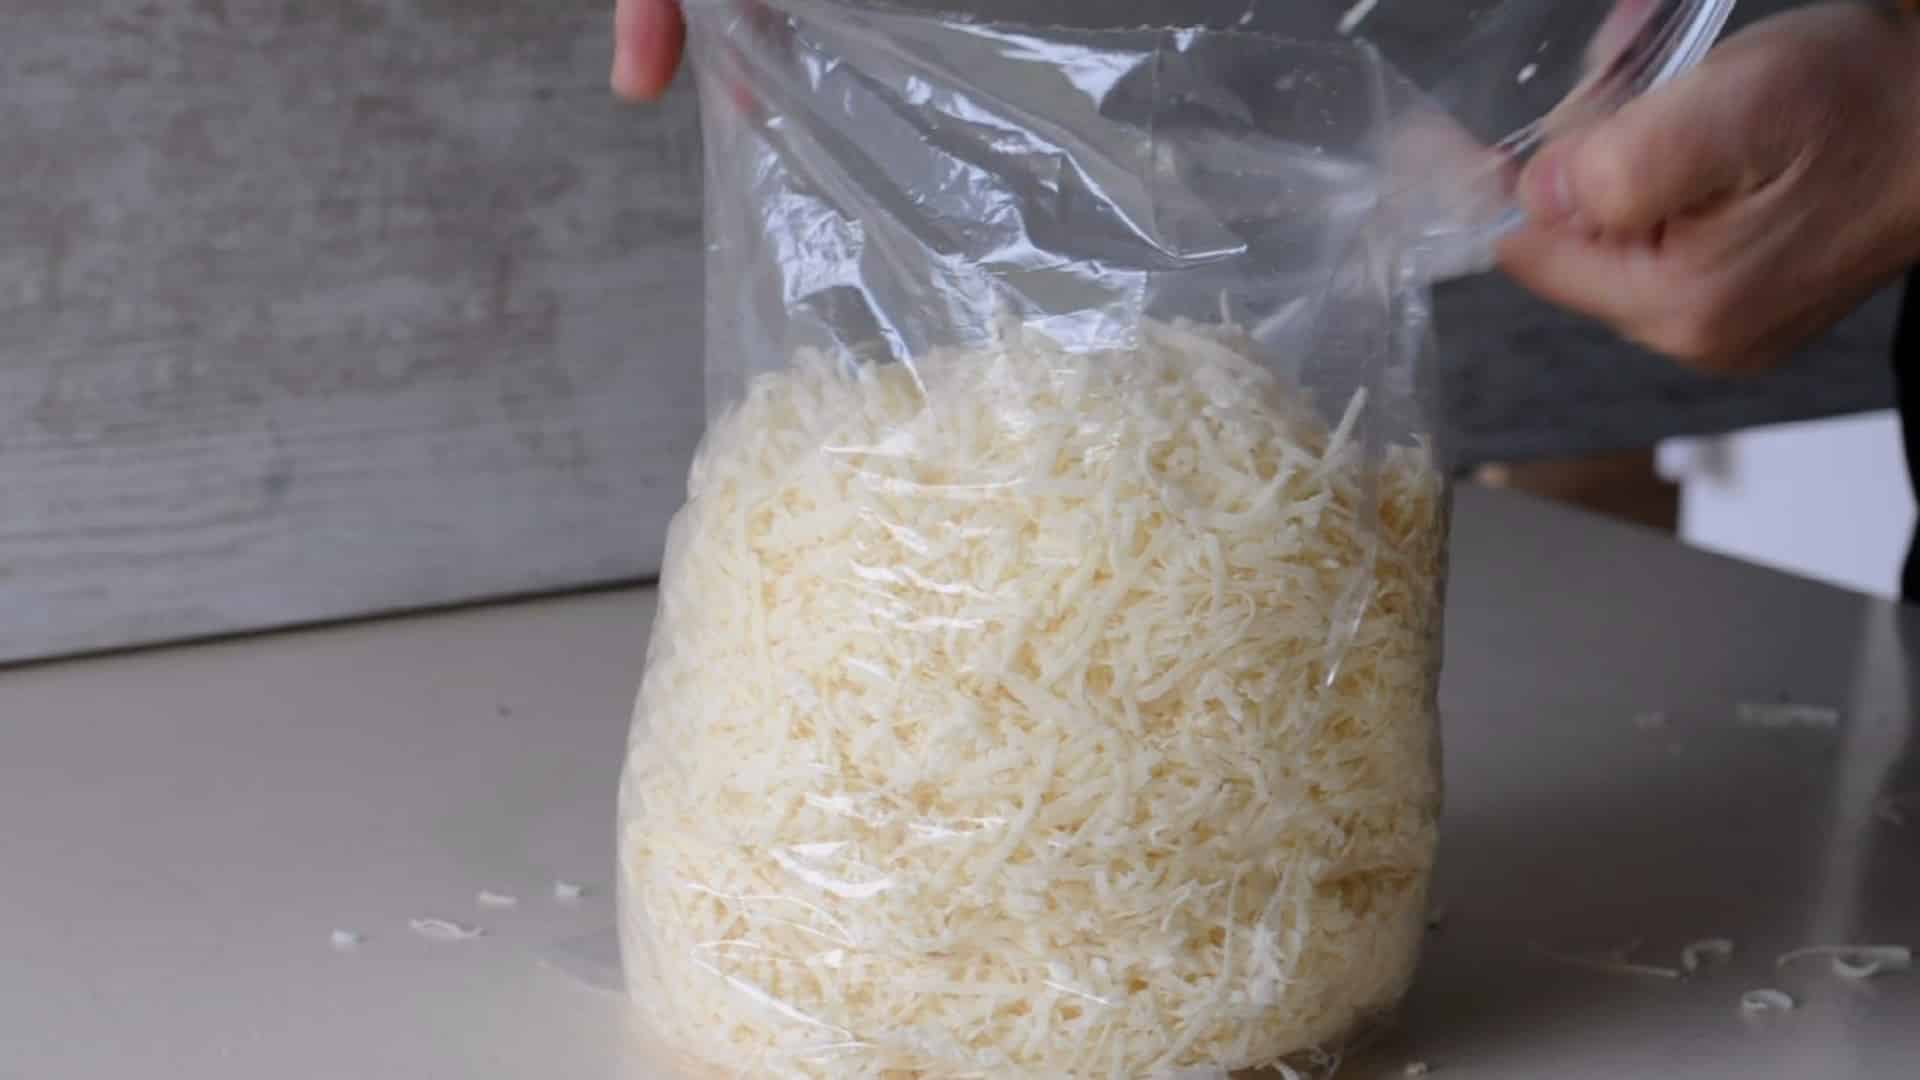 Place the parmesan in a large plastic bag